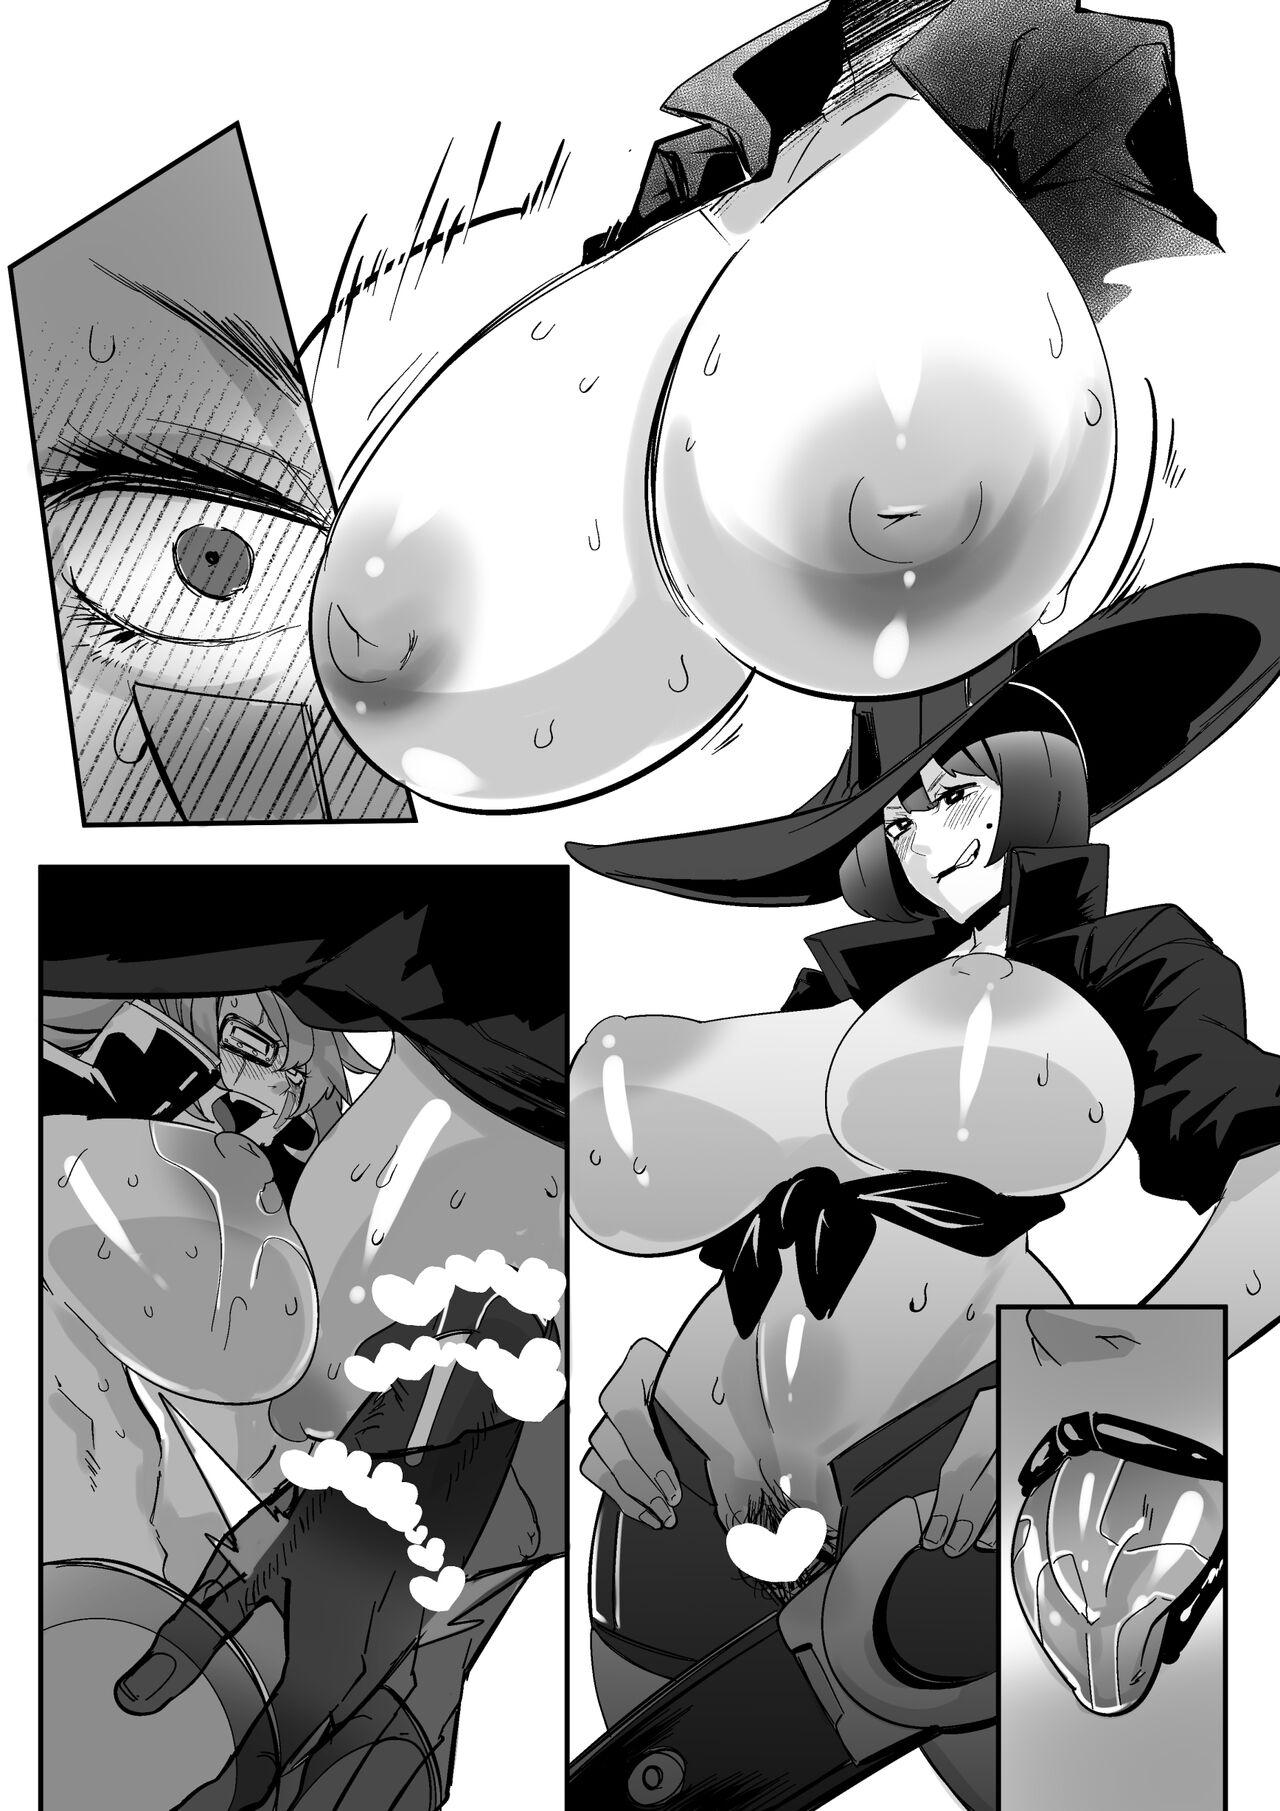 Concha [Mr.way] 生えちゃった梅喧姐さんとイノ (ギルティギア)（Chinese） - Guilty gear High - Page 8